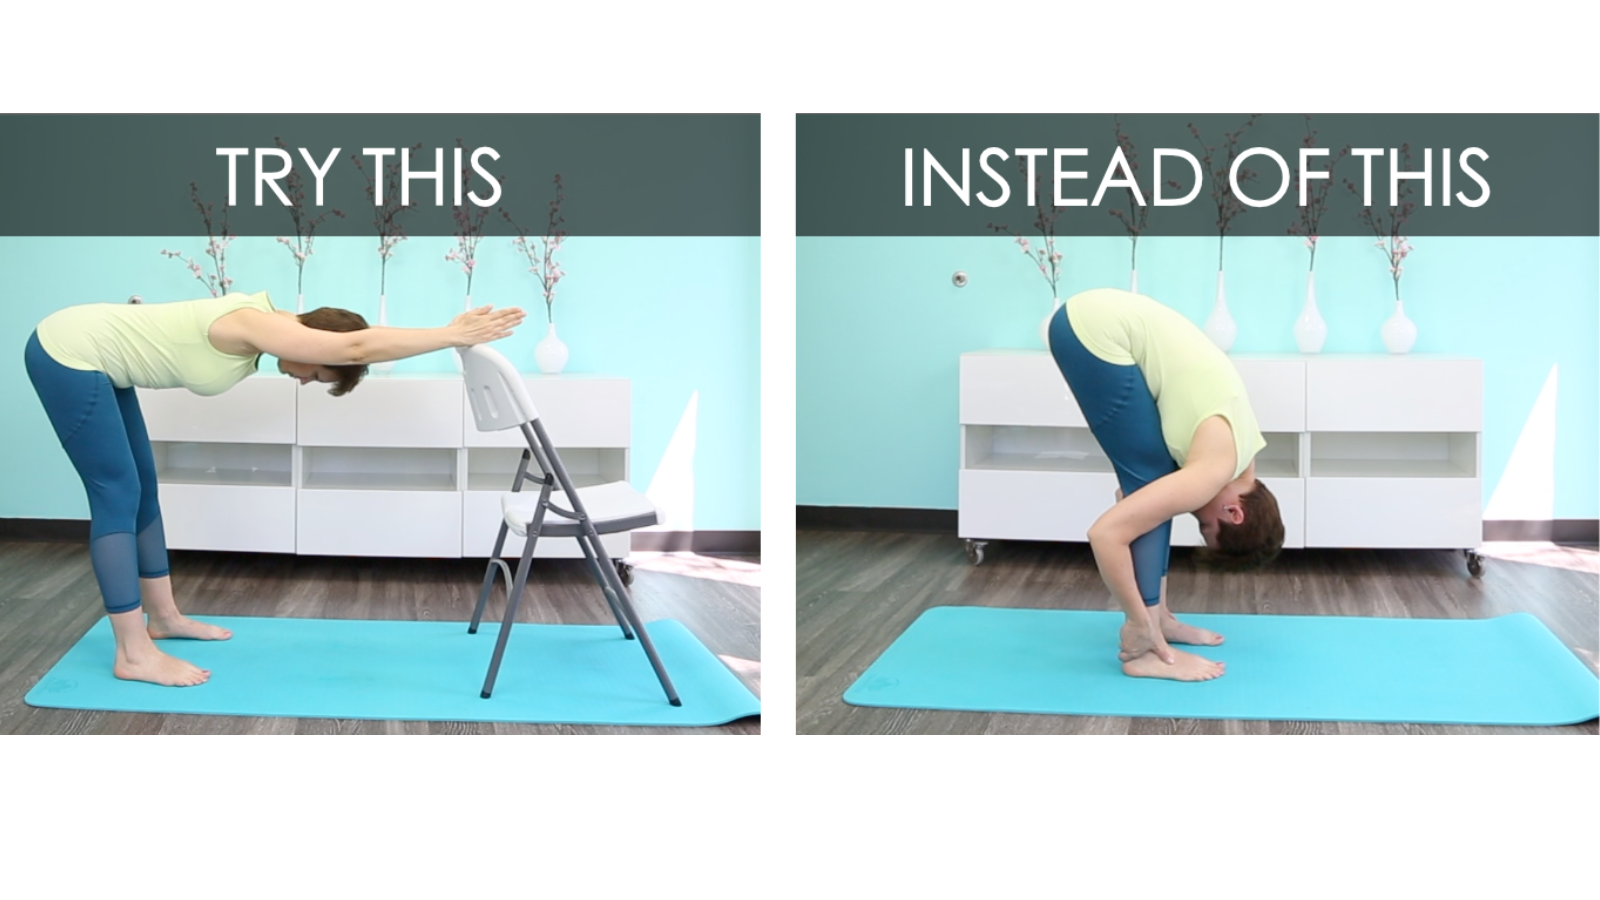 Forward bend variations for safe yoga practice if diagnosed with Osteoporosis.